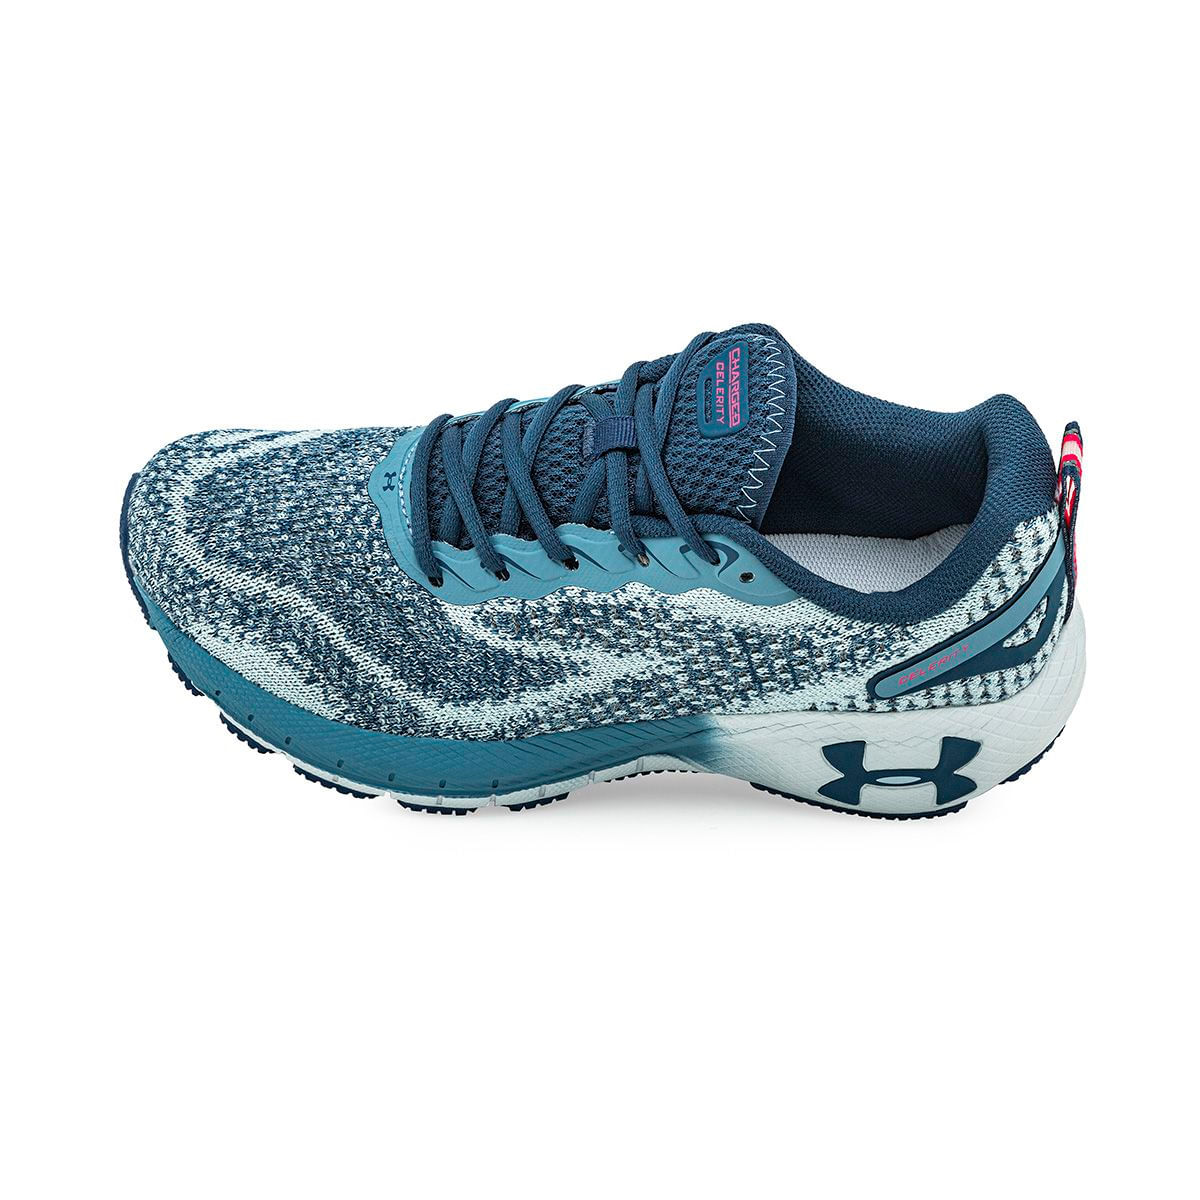 Under Armour Zapatillas Charged Celerity Mujer - 3025291400